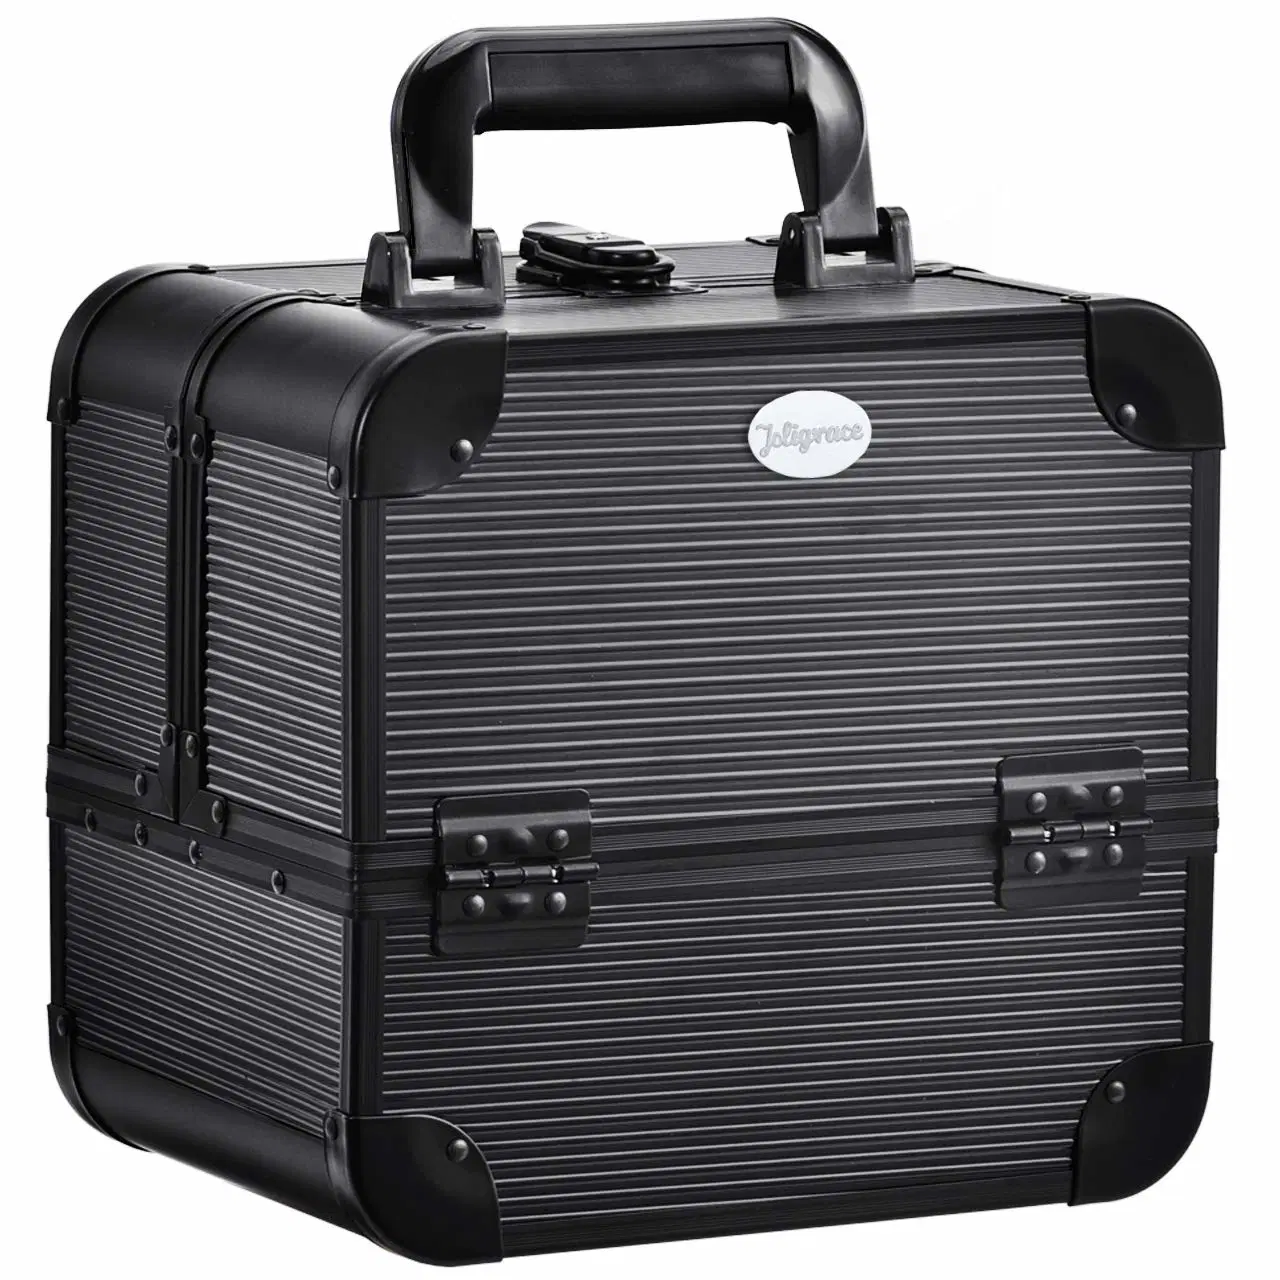 Black Aluminum Cosmetic Case Makeup Case with Trays Beauty Case